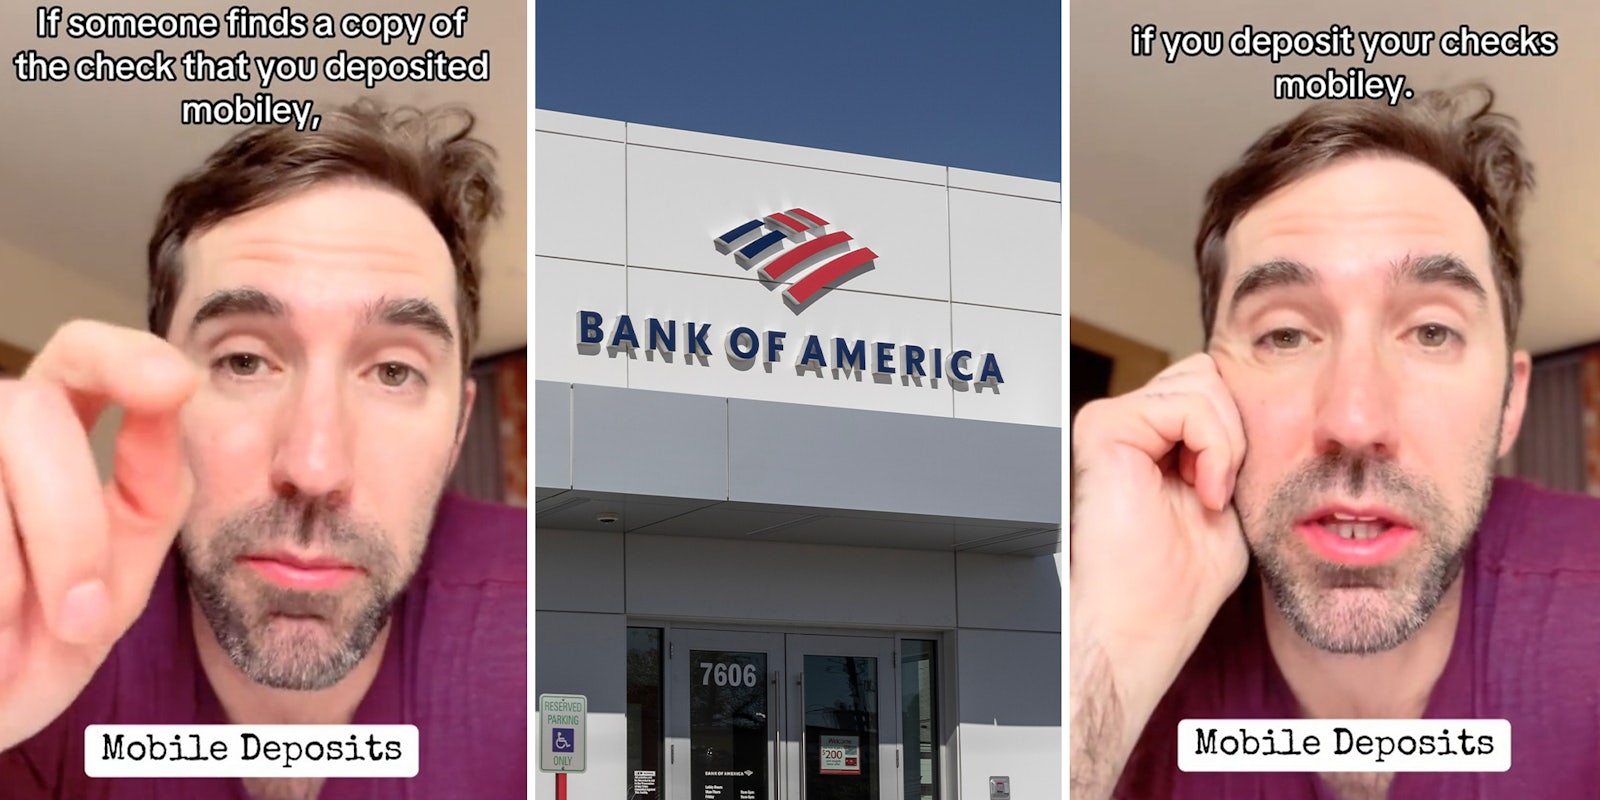 Bank of America customer issues warning about depositing checks on mobile